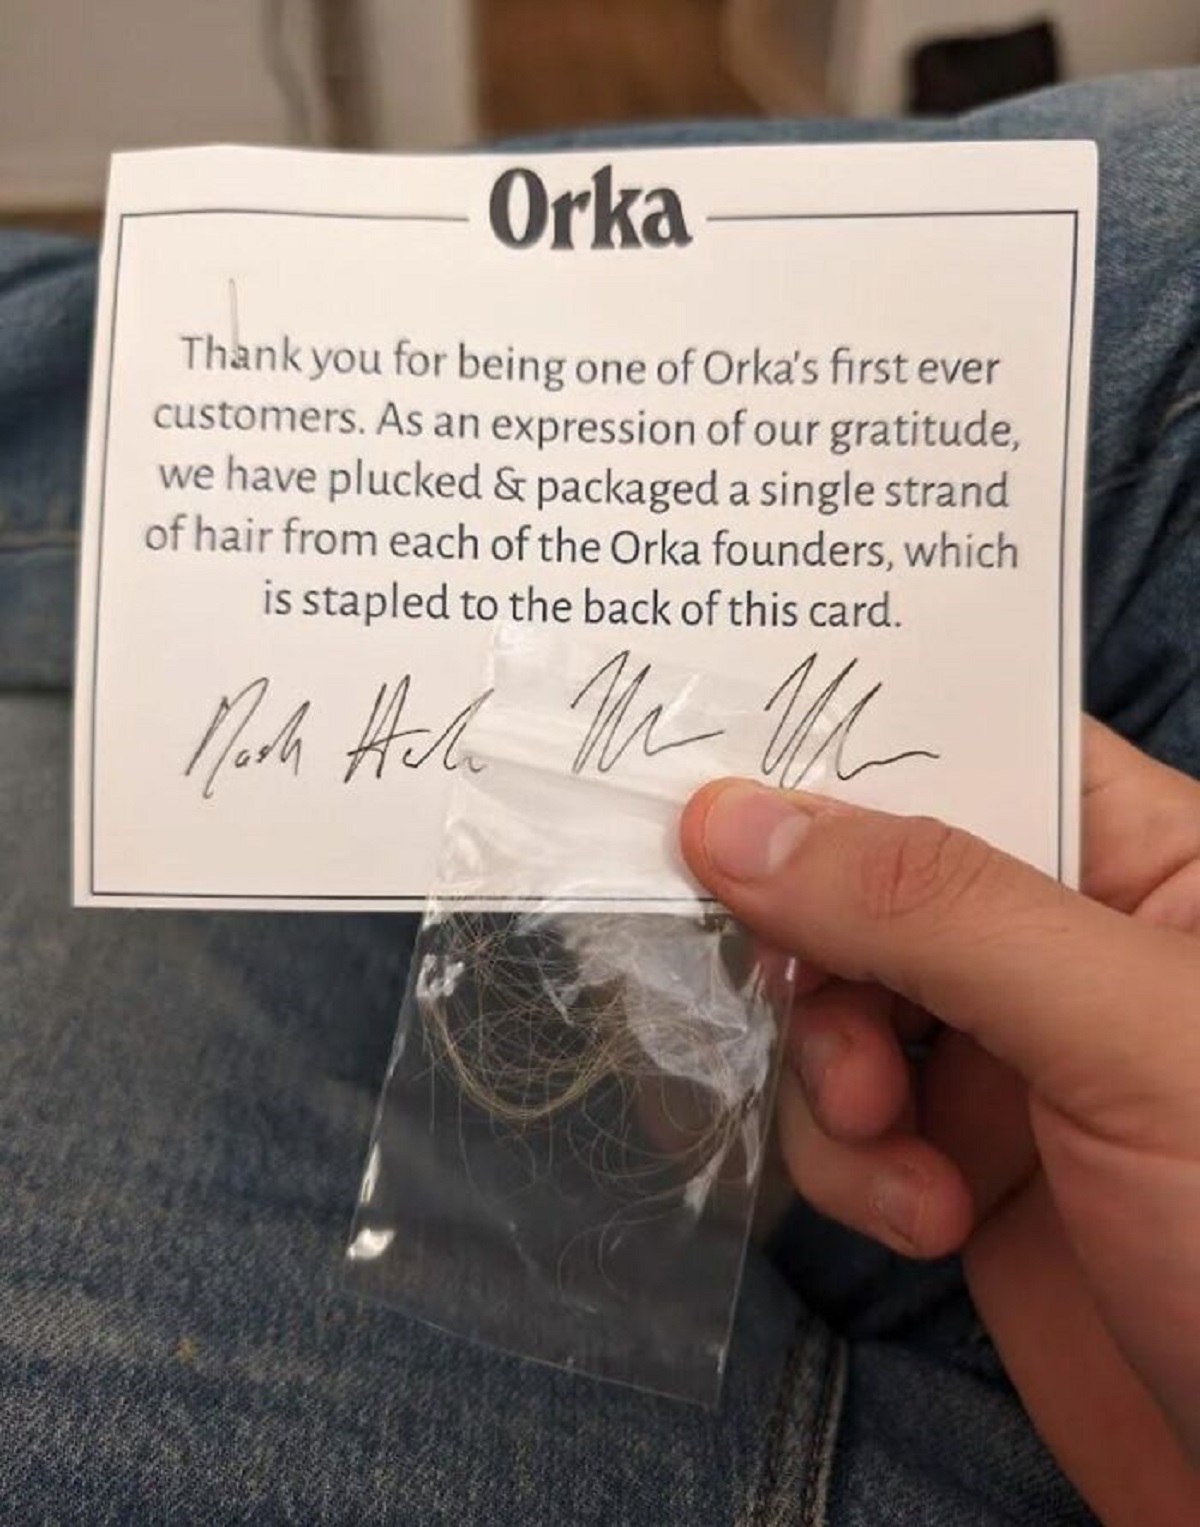 orka hair - Orka Thank you for being one of Orka's first ever customers. As an expression of our gratitude, we have plucked & packaged a single strand of hair from each of the Orka founders, which is stapled to the back of this card. Mark Hah M